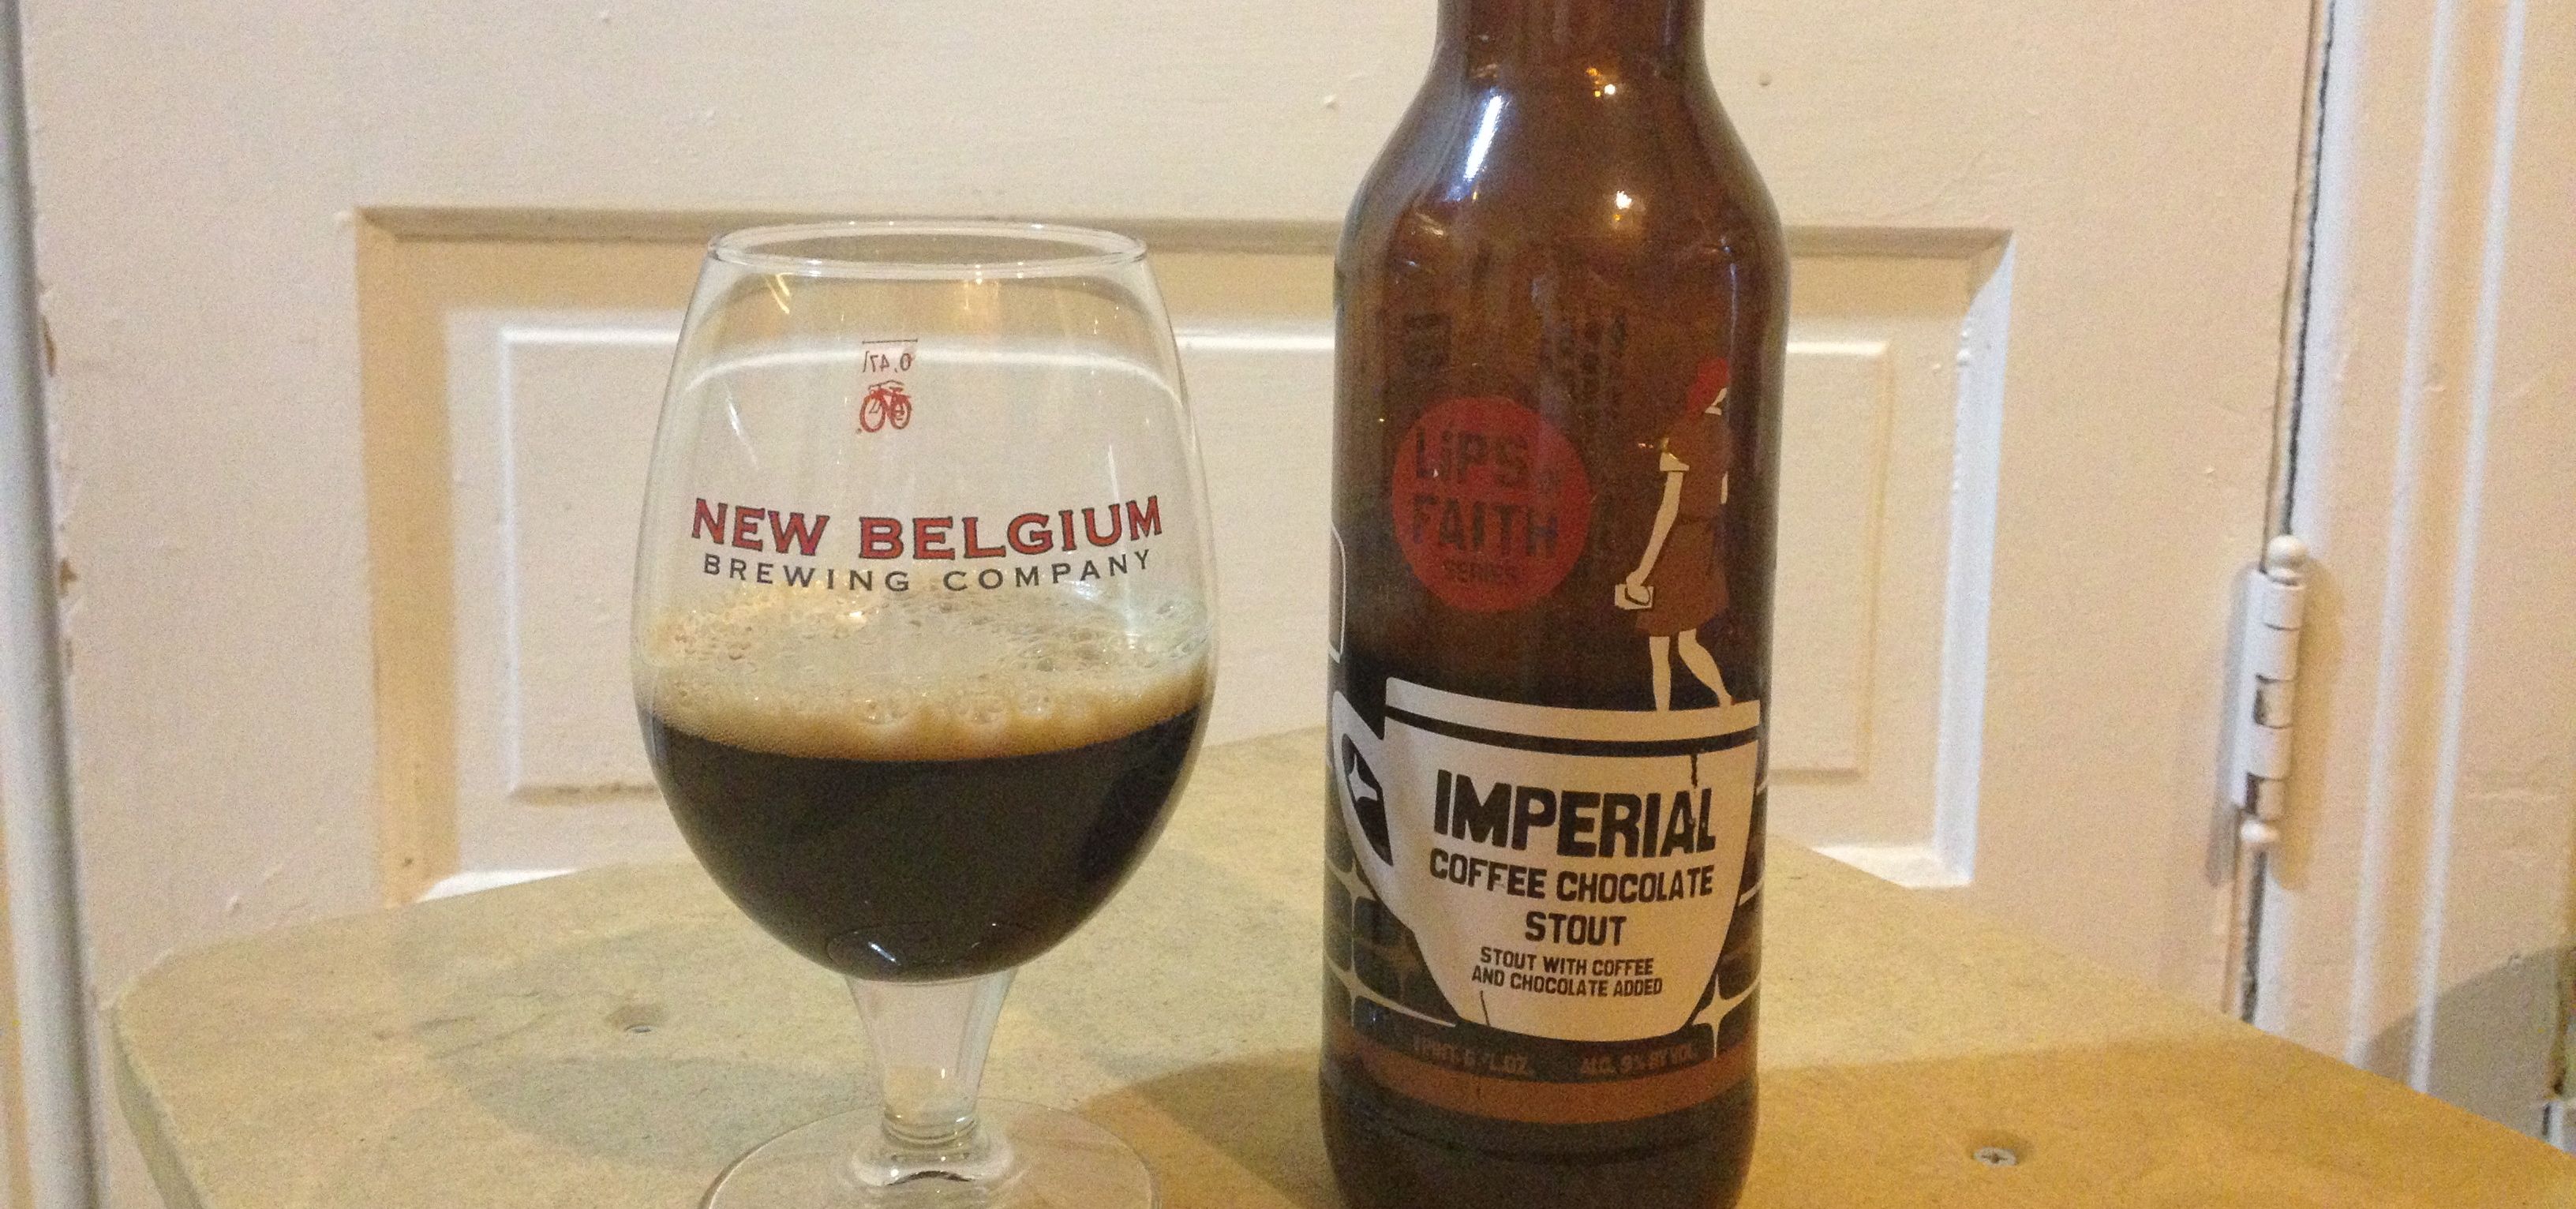 New Belgium Brewing- Imperial Coffee Chocolate Stout